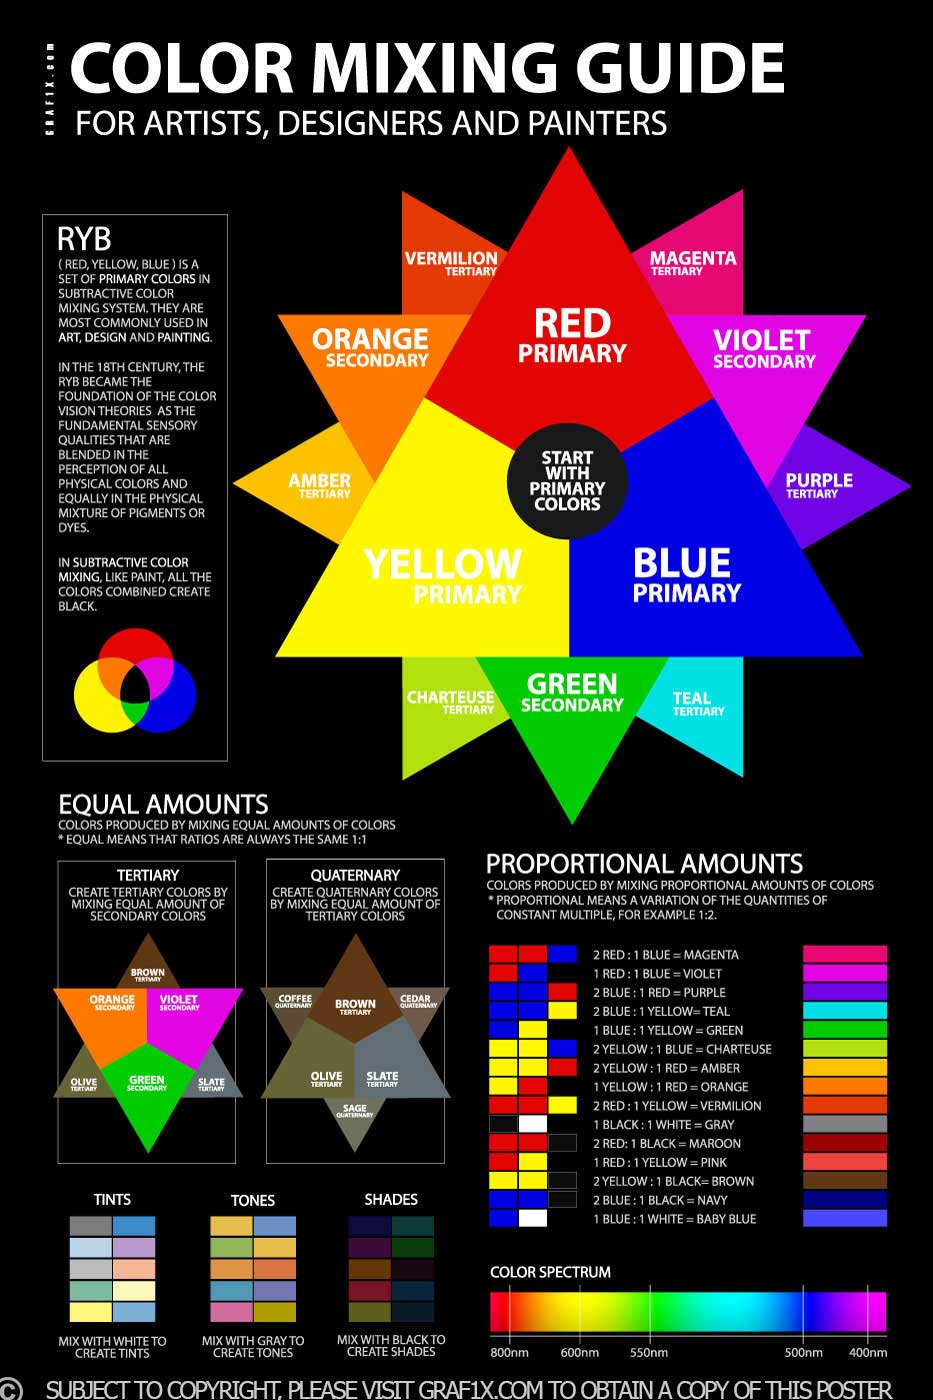 red yellow blue color mixing chart shows primary, secondary, tertiary and quaternary colors with a guide on how to mix them.